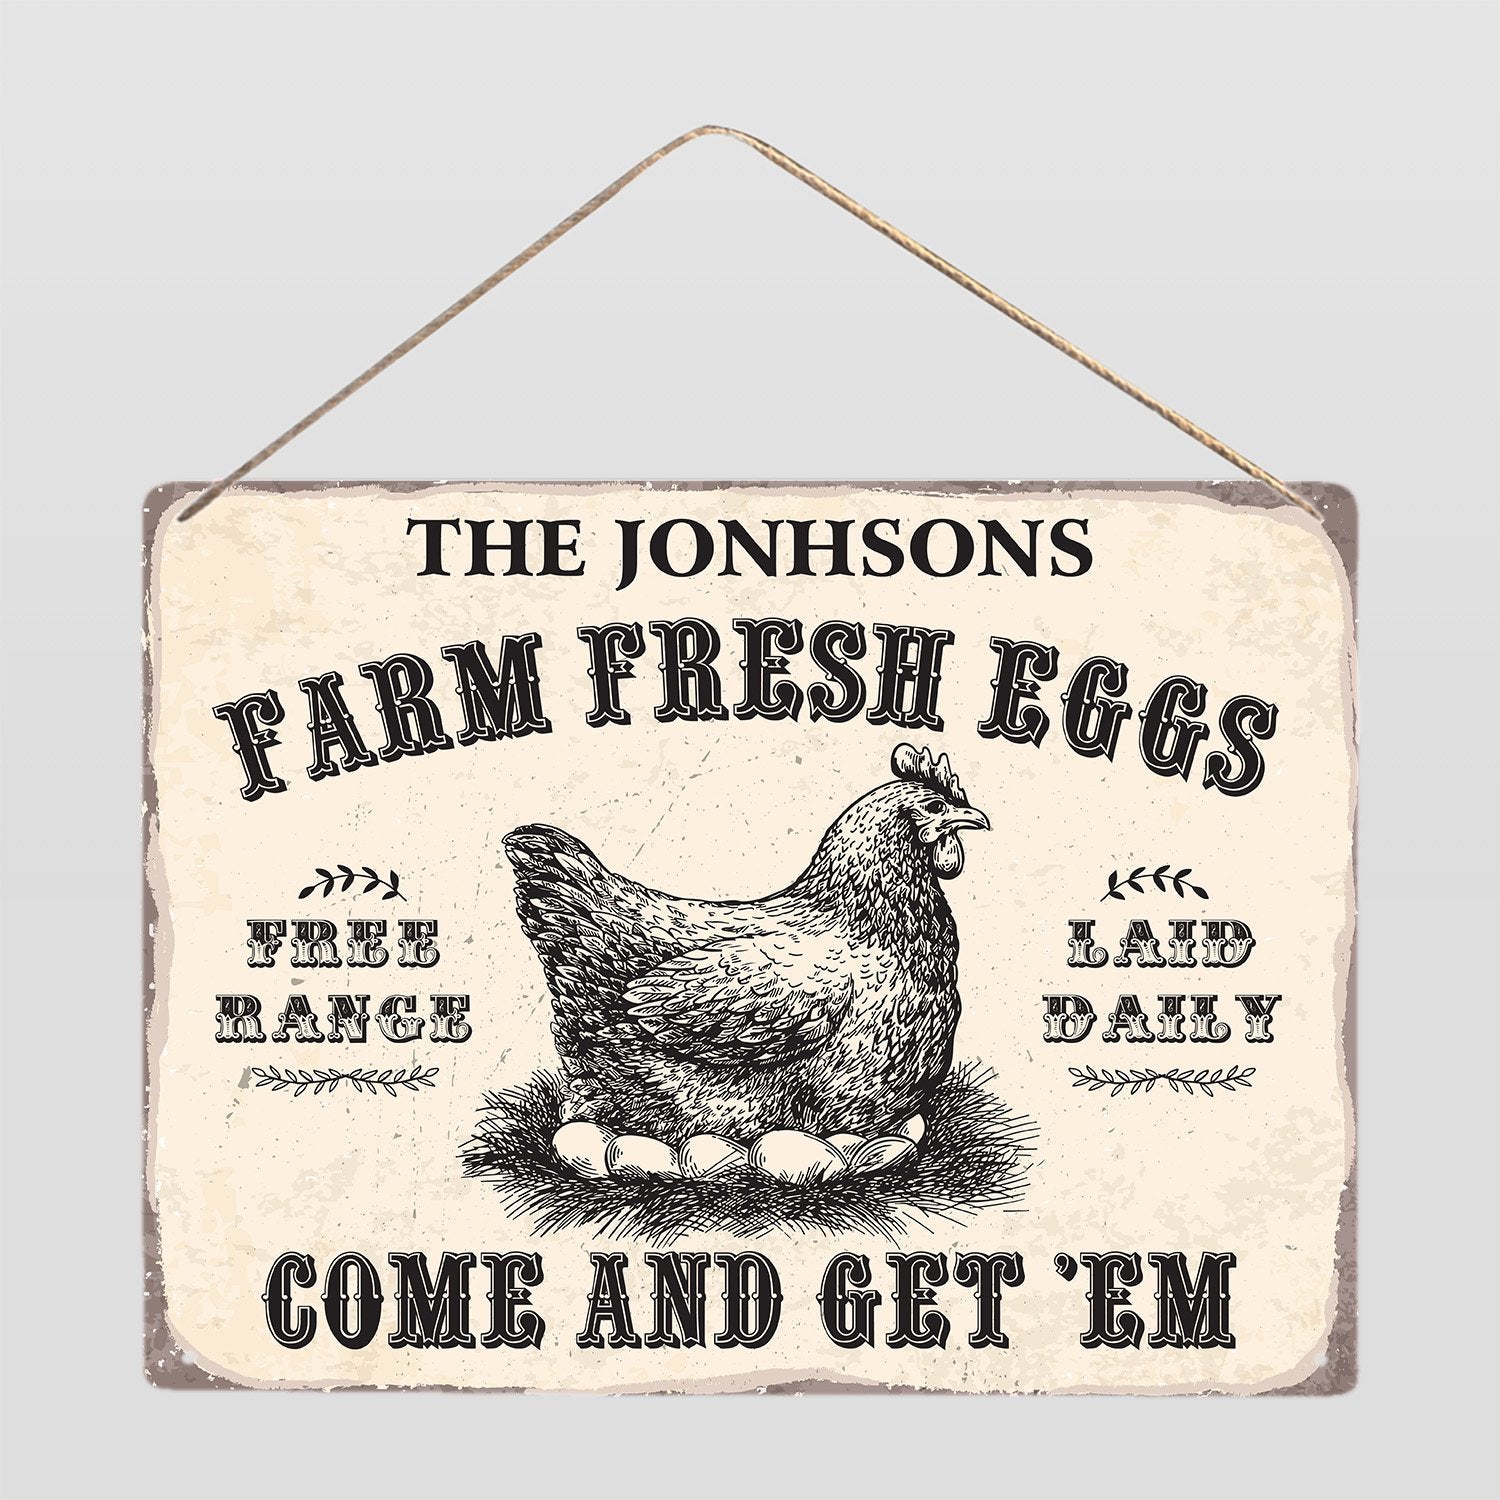 Chicken Coop, Farm Fresh Eggs Come And Get Em, Customized Farm Sign